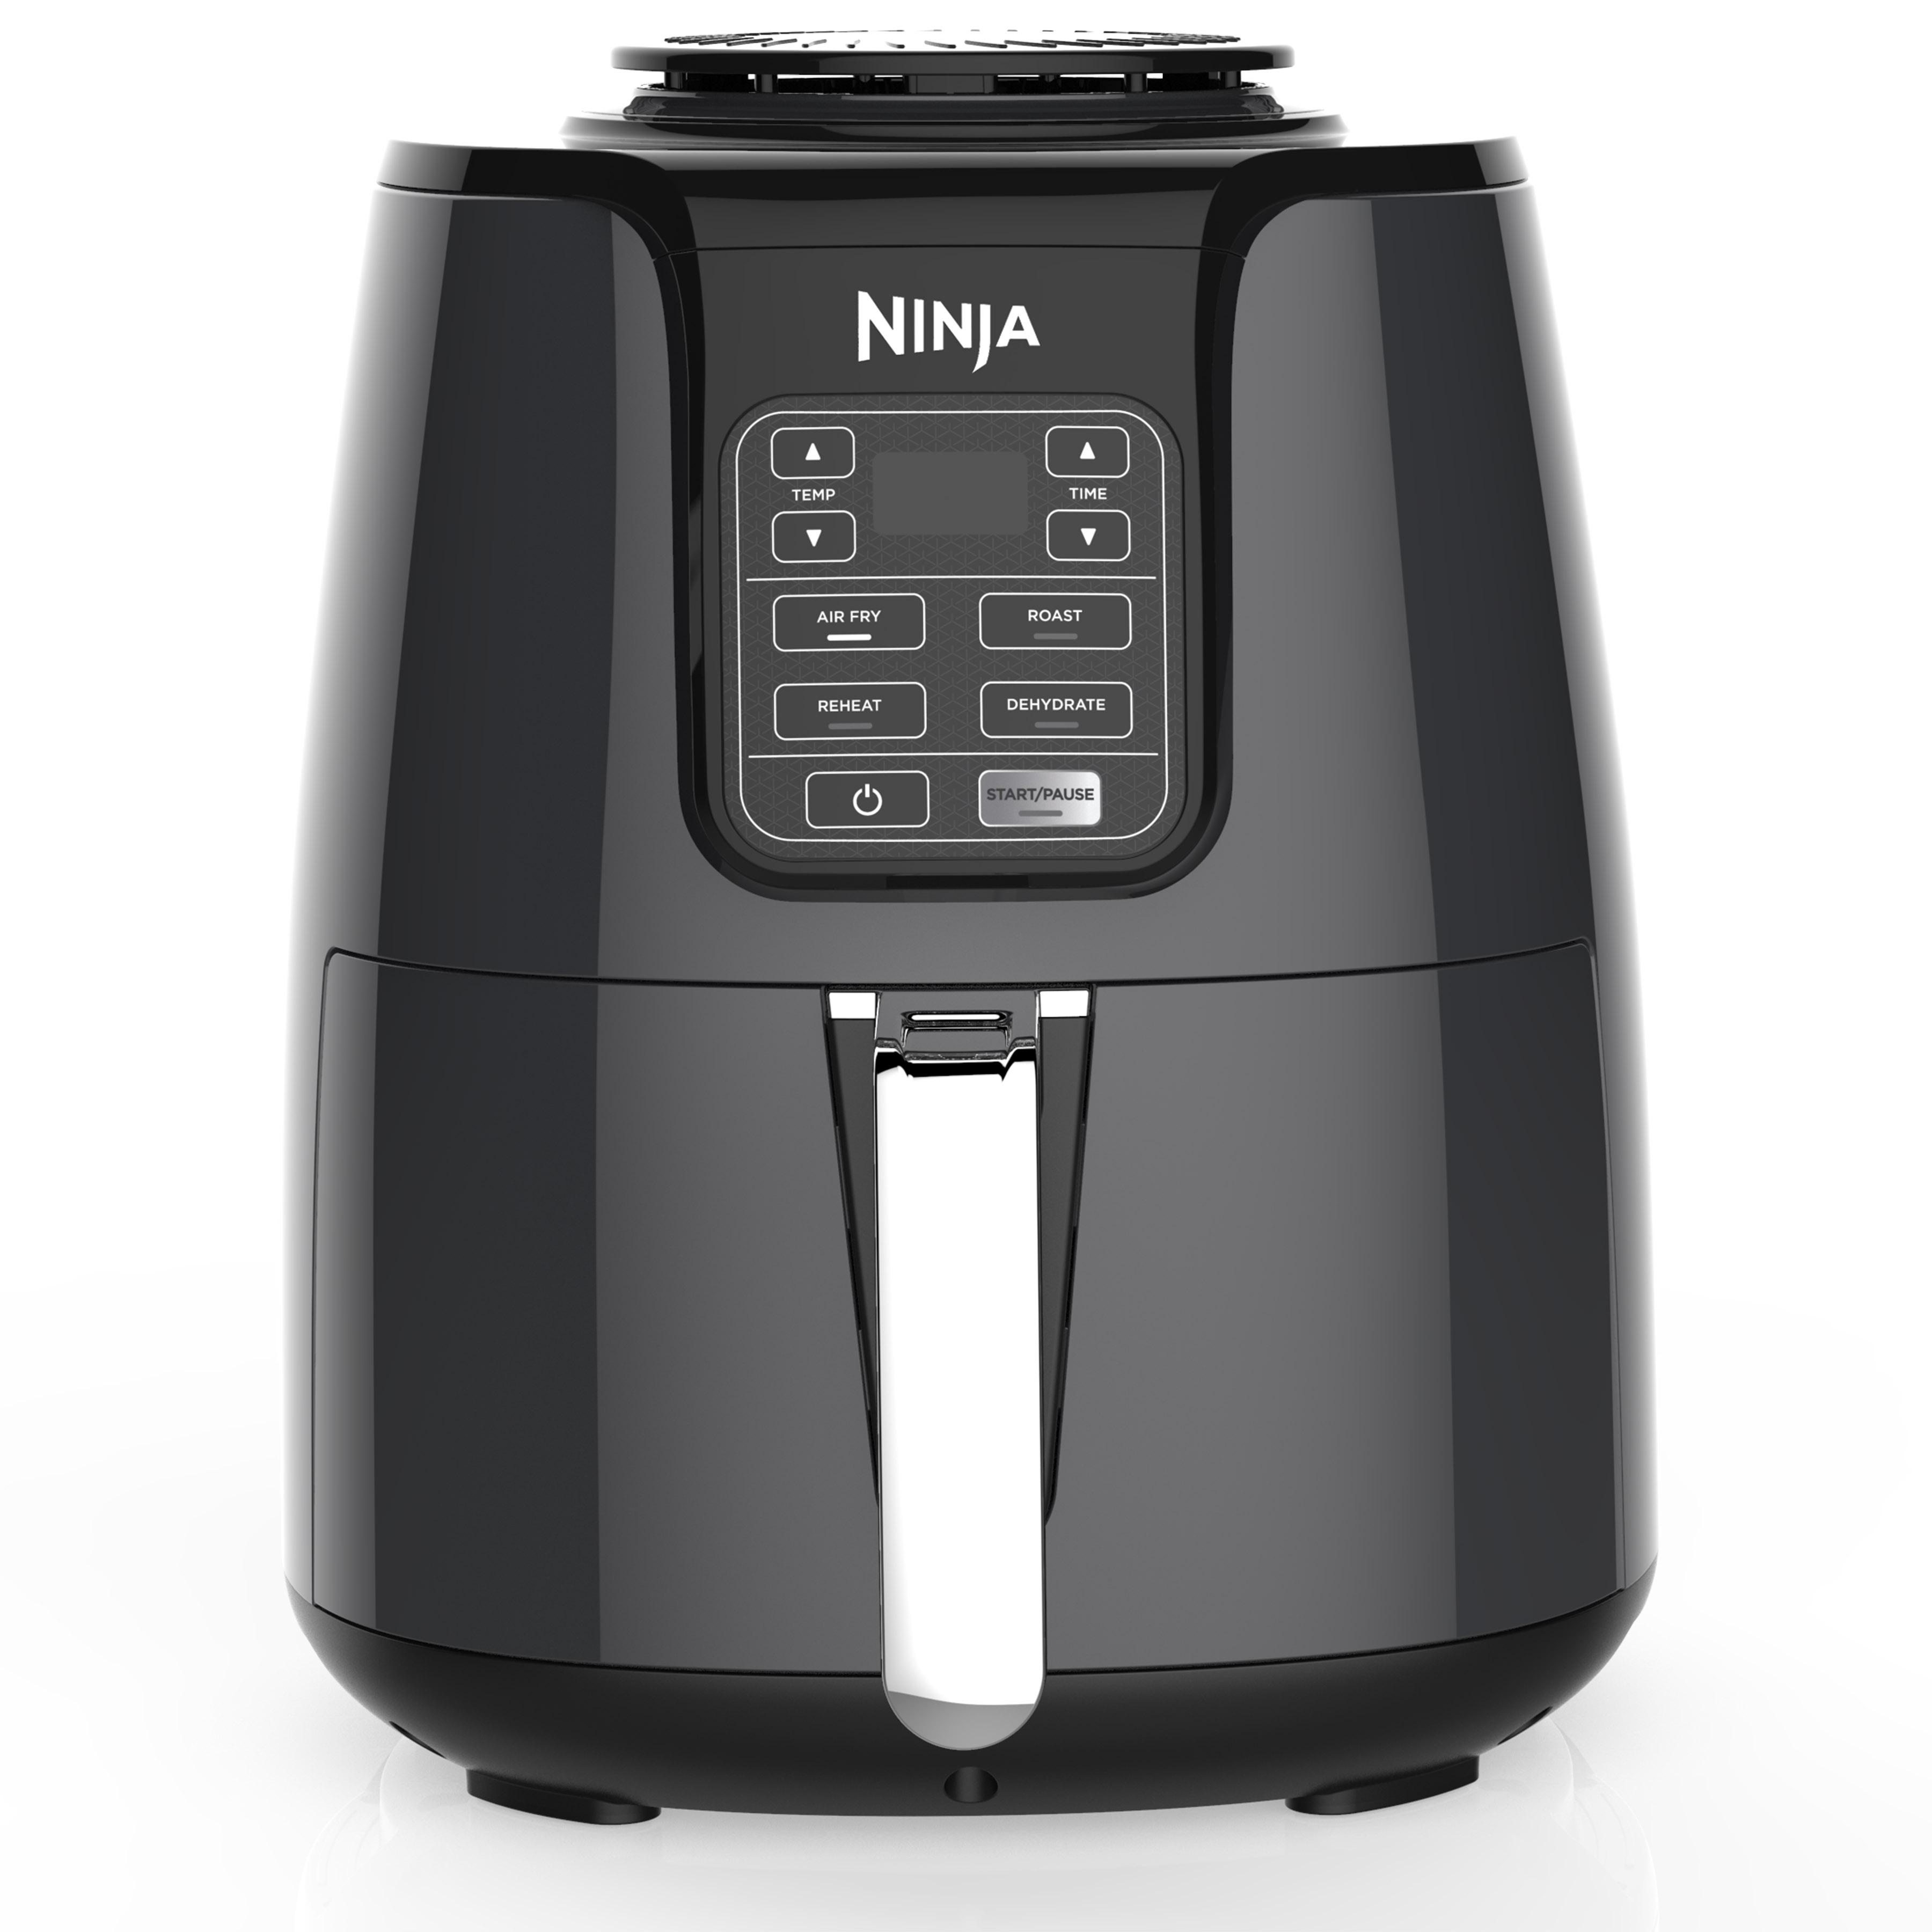 Air Fryer: You can air fry anything in this.